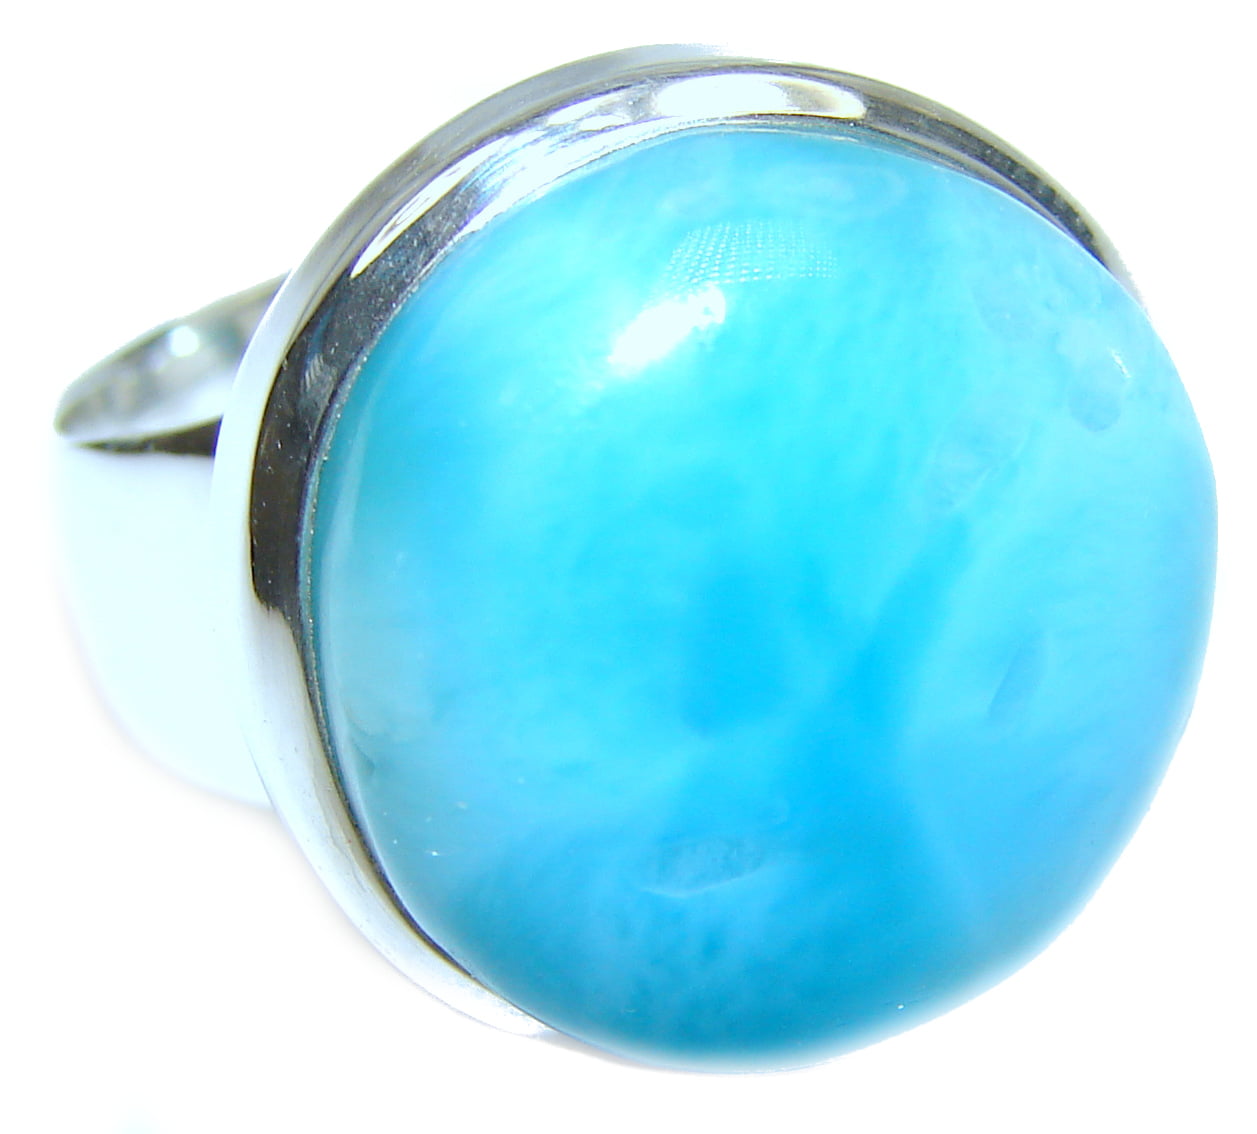 SilverRush Style Larimar Women 925 Sterling Silver Ring Size 8 FREE GIFT BOX